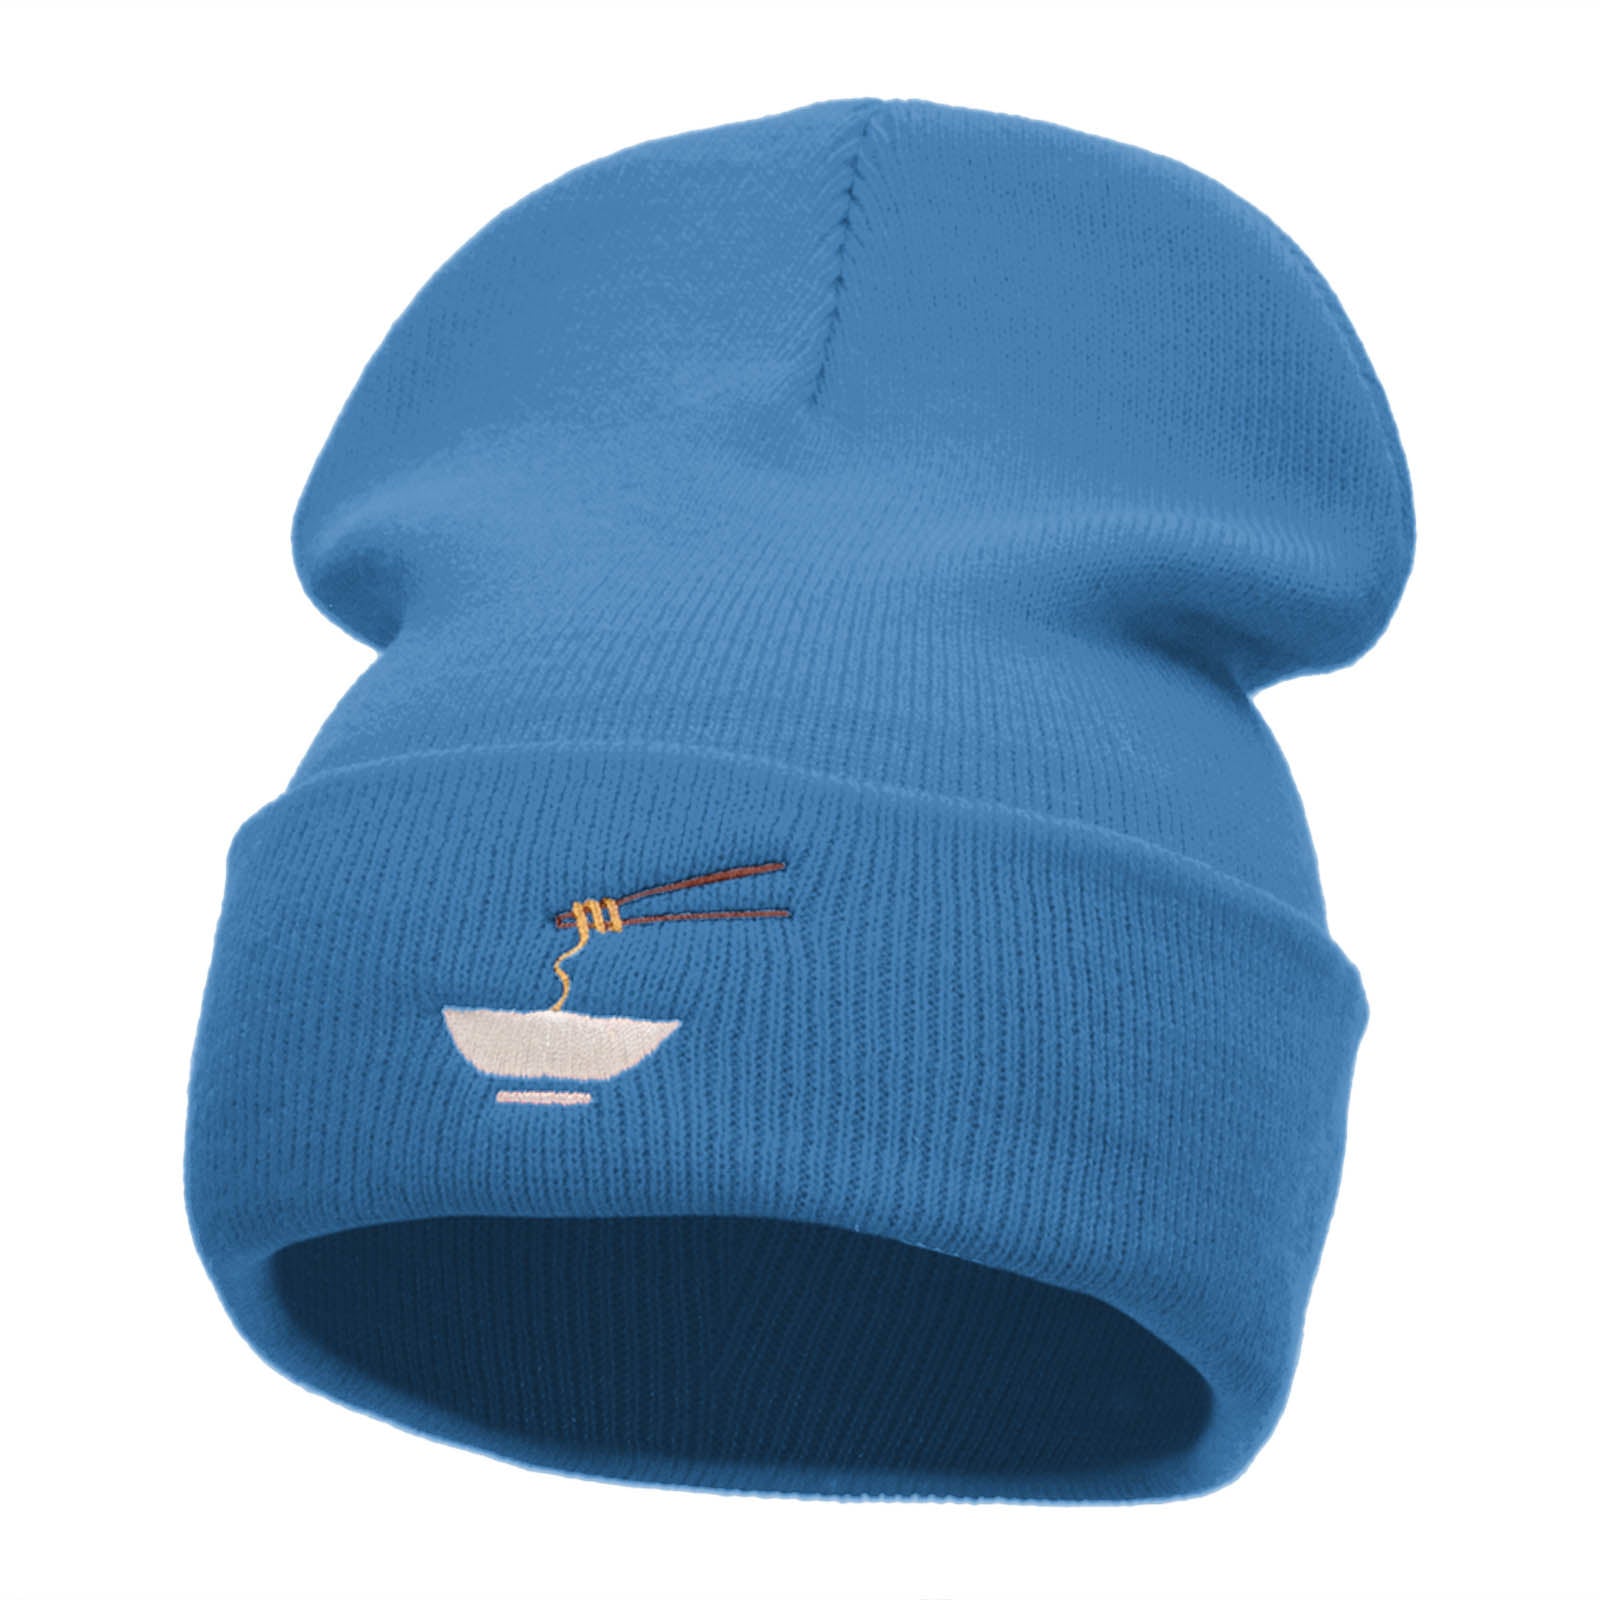 Noodle Bowl Embroidered 12 Inch Long Knitted Beanie - Sky Blue OSFM